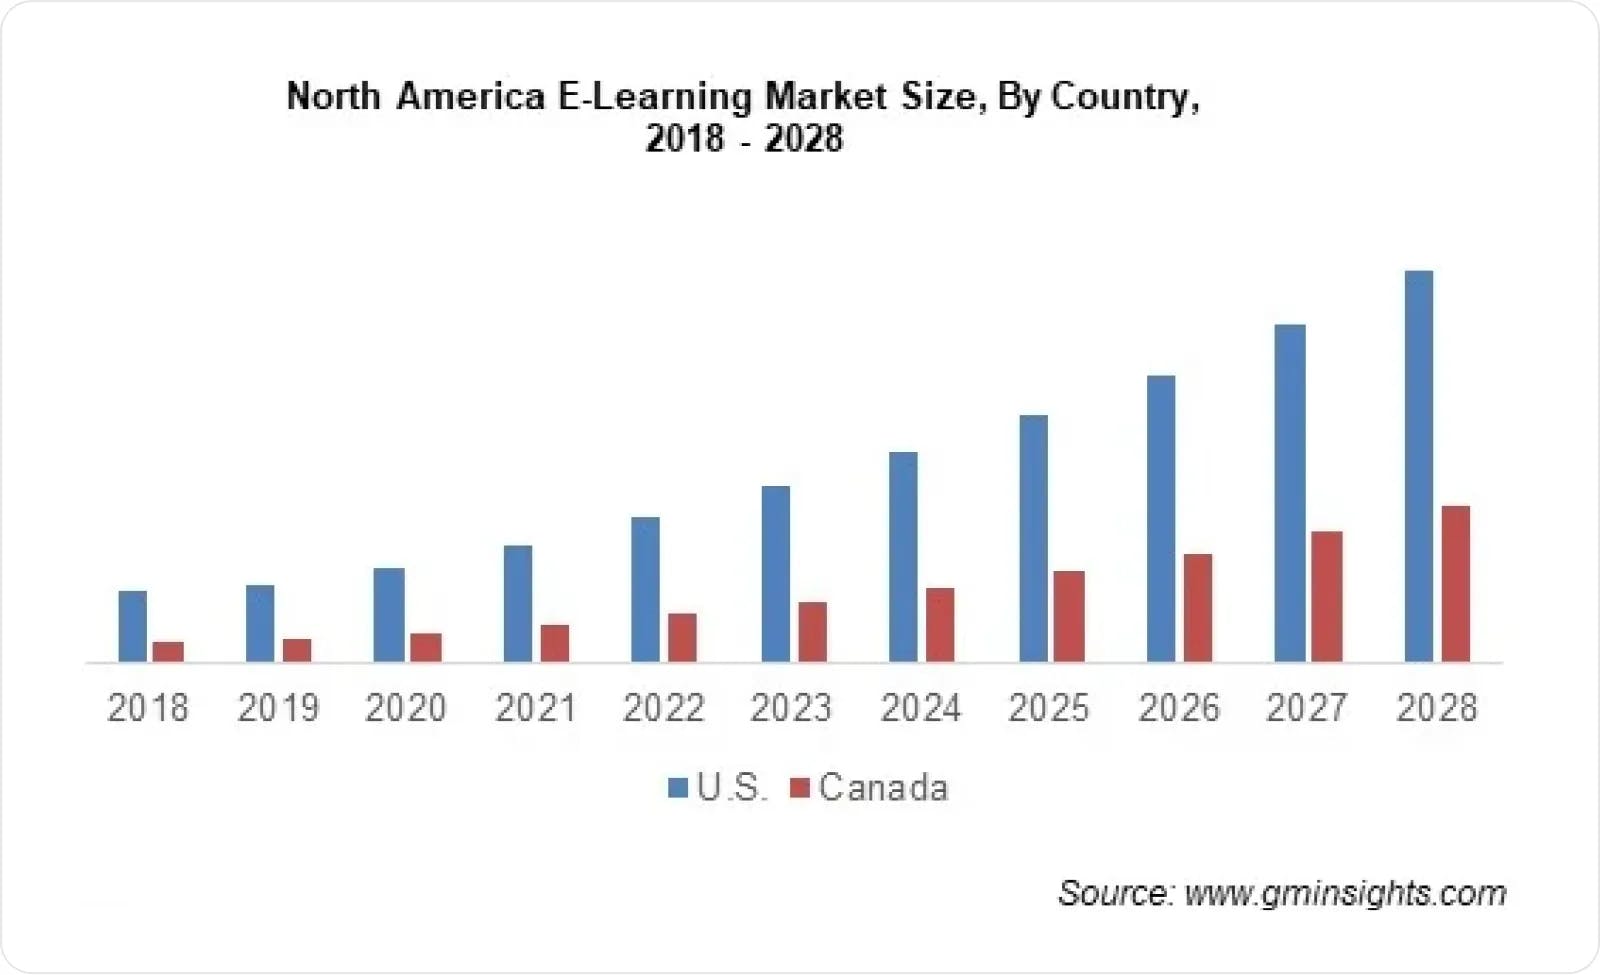 NA e-learning market size by country